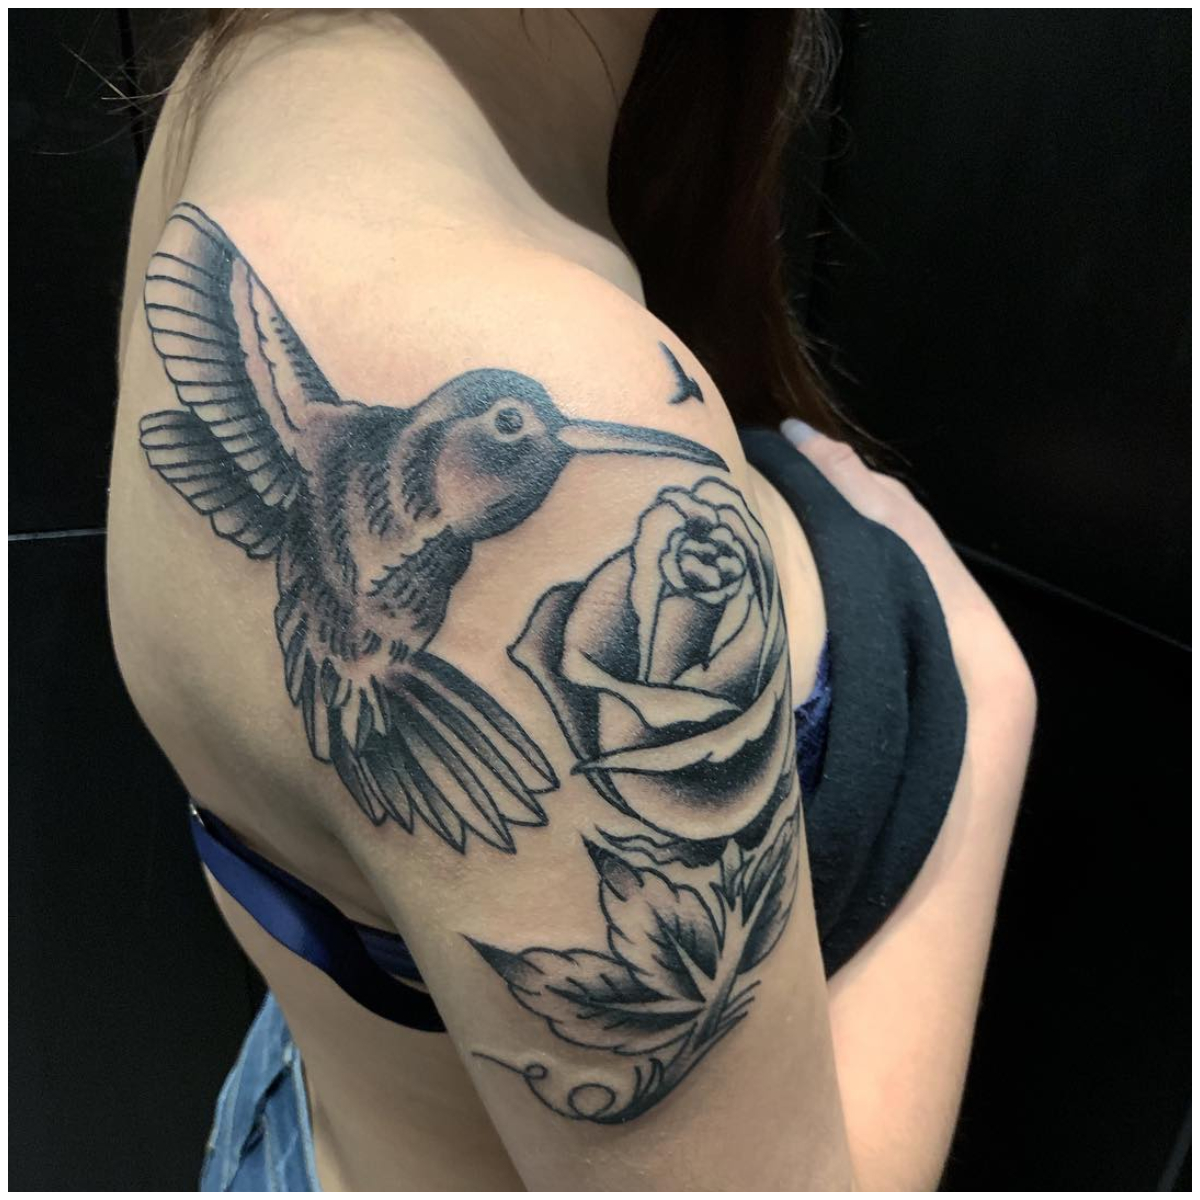 Unify Tattoo Company  Tattoos  Flower Rose  Hummingbird and Roses